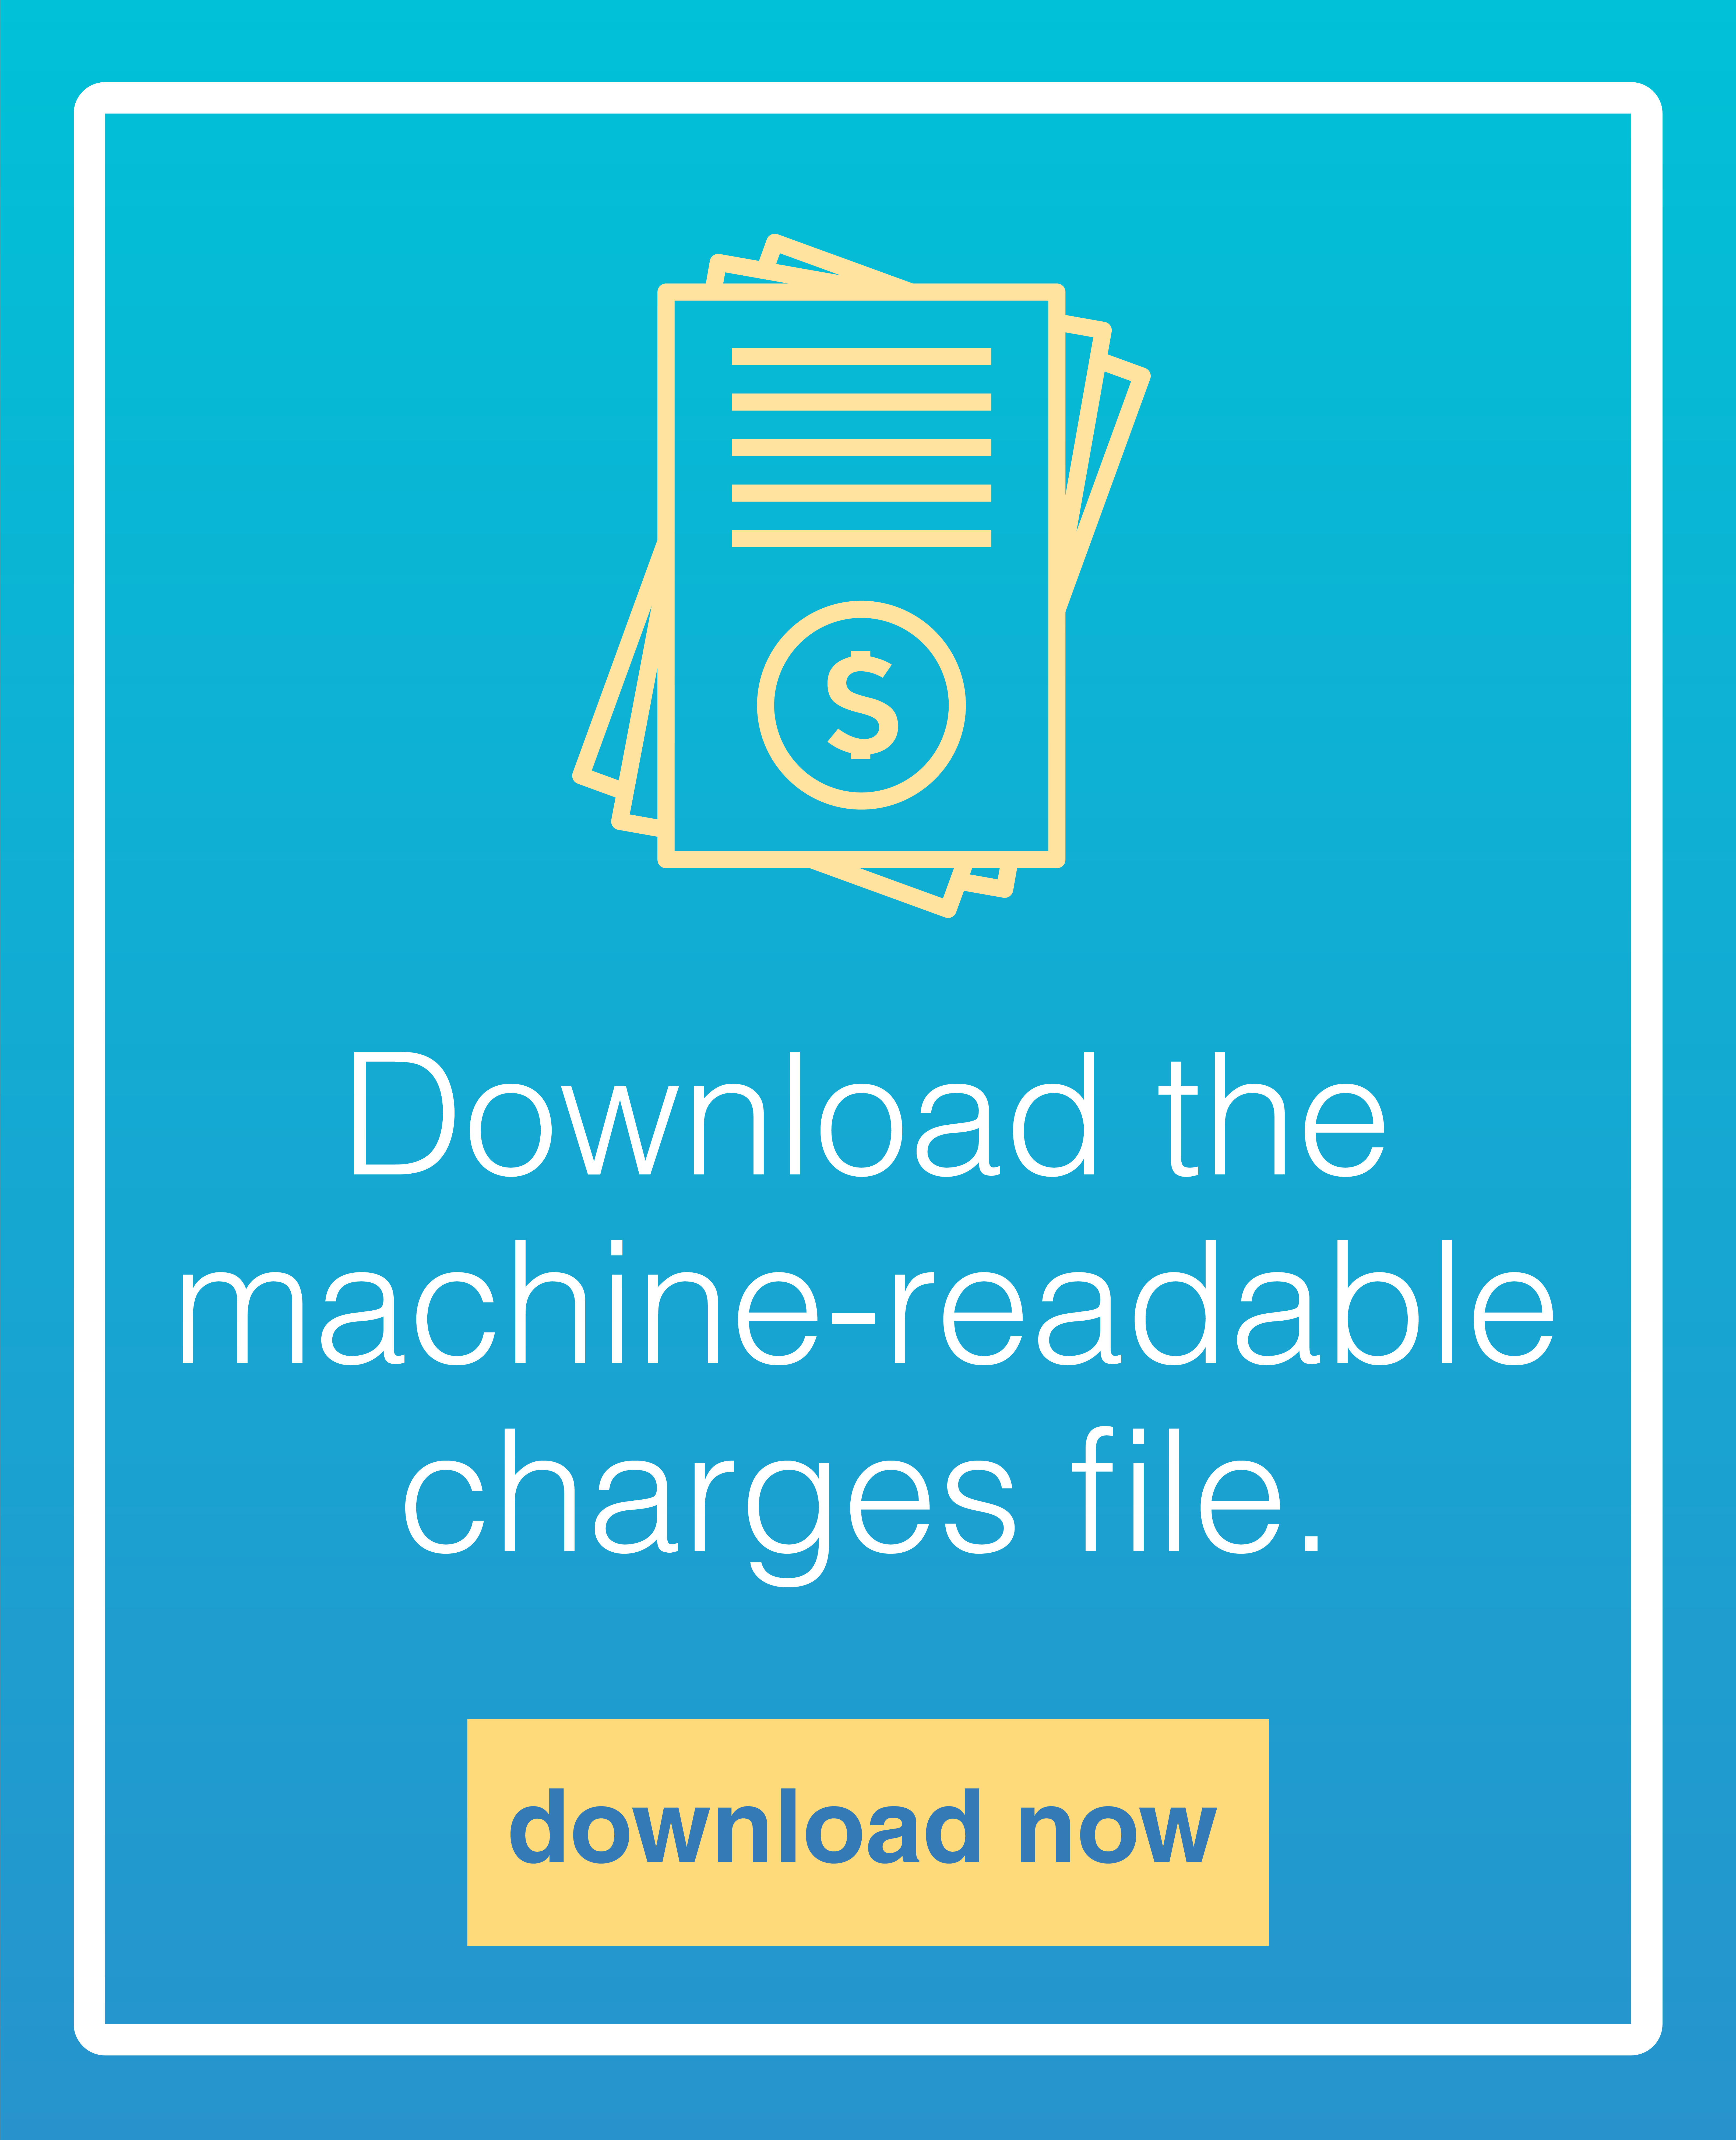 Download machine-readable charges file